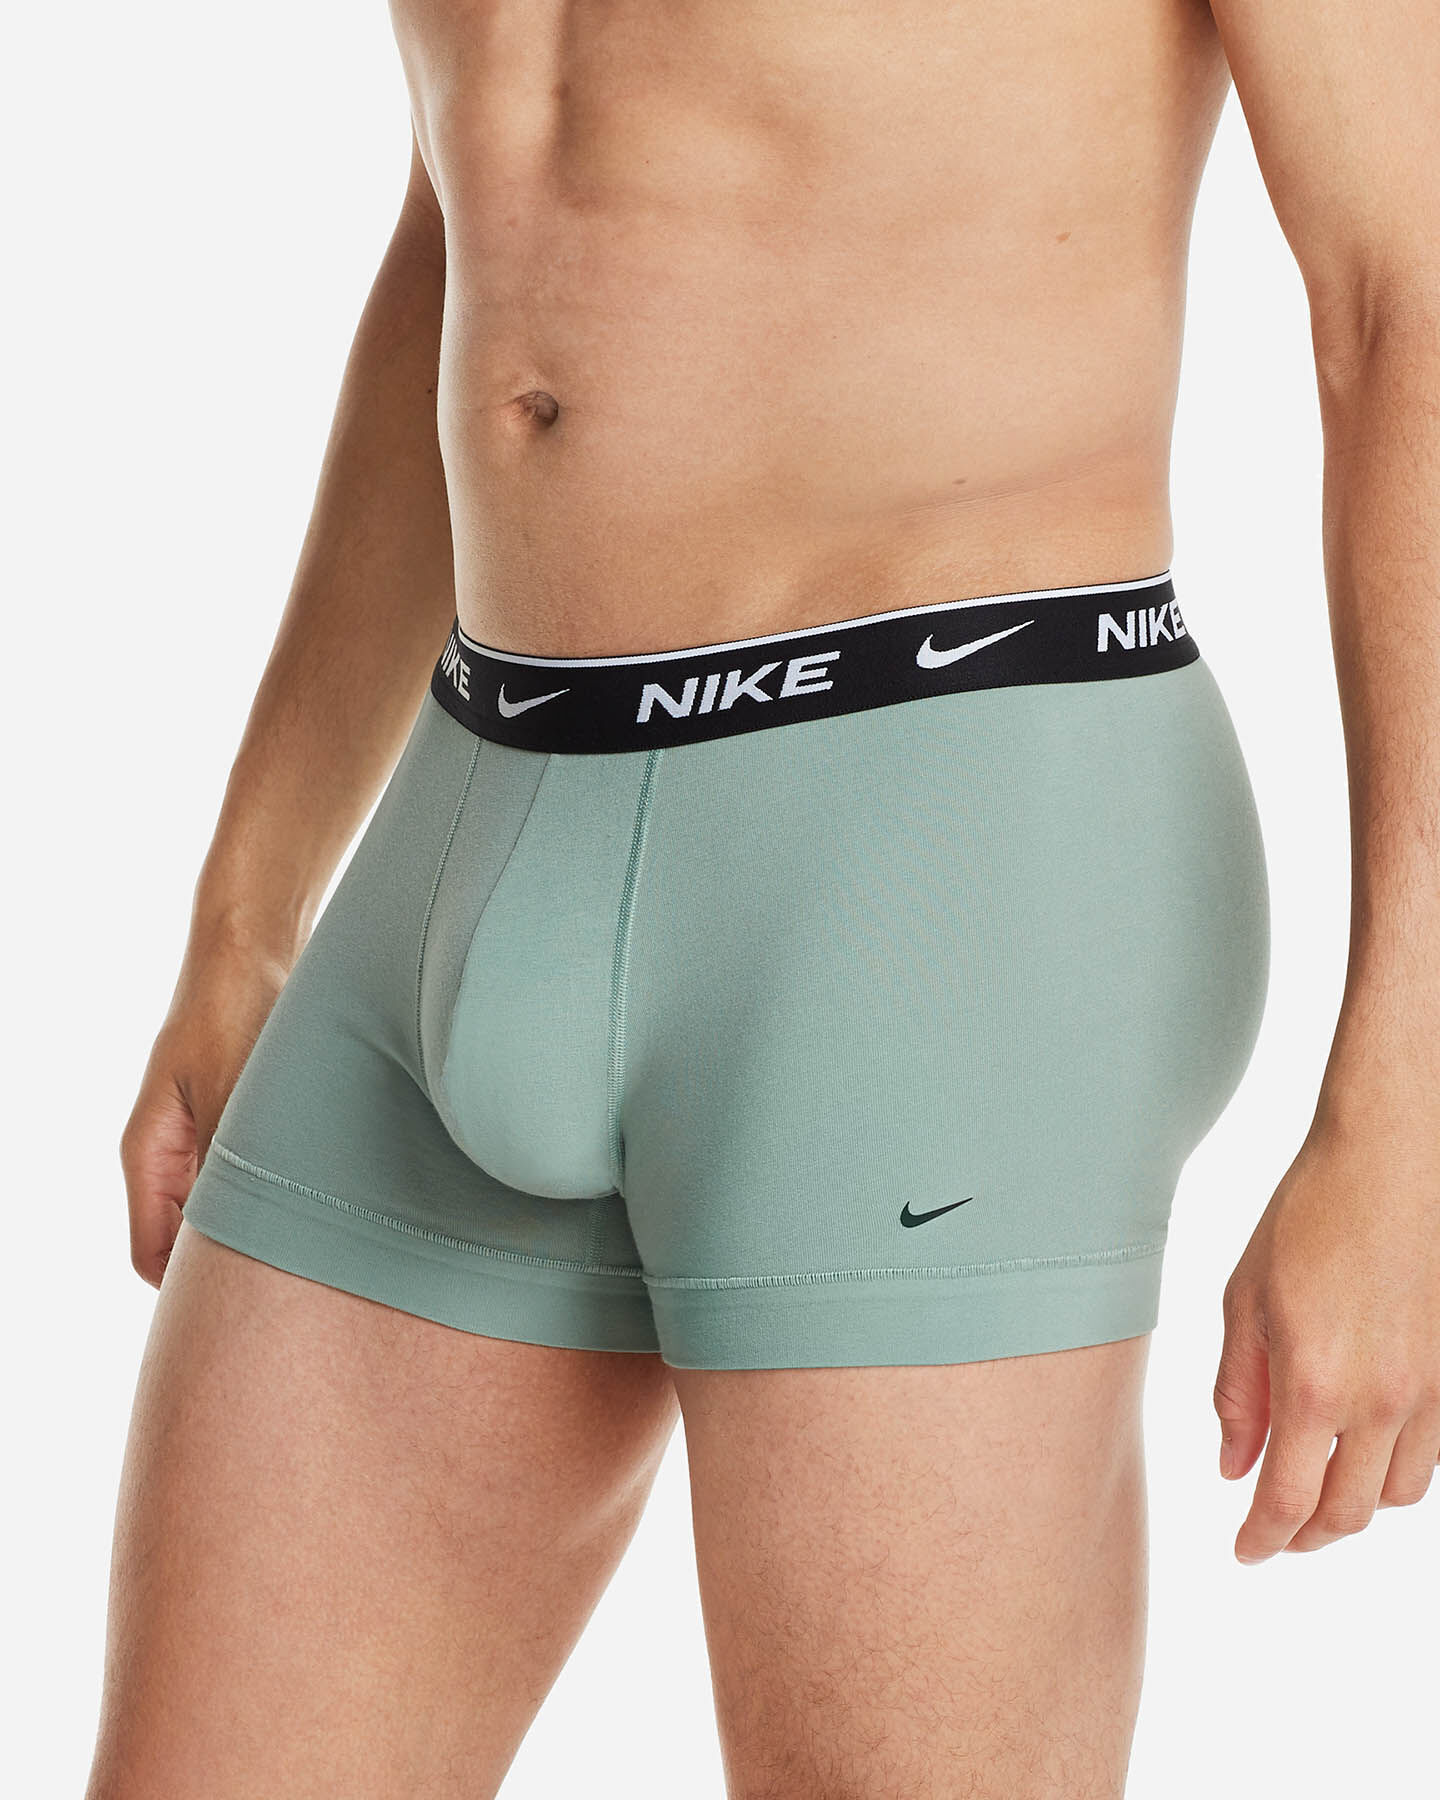  Intimo NIKE 3PACK BOXER EVERYDAY M S4099881|KUS|S scatto 2